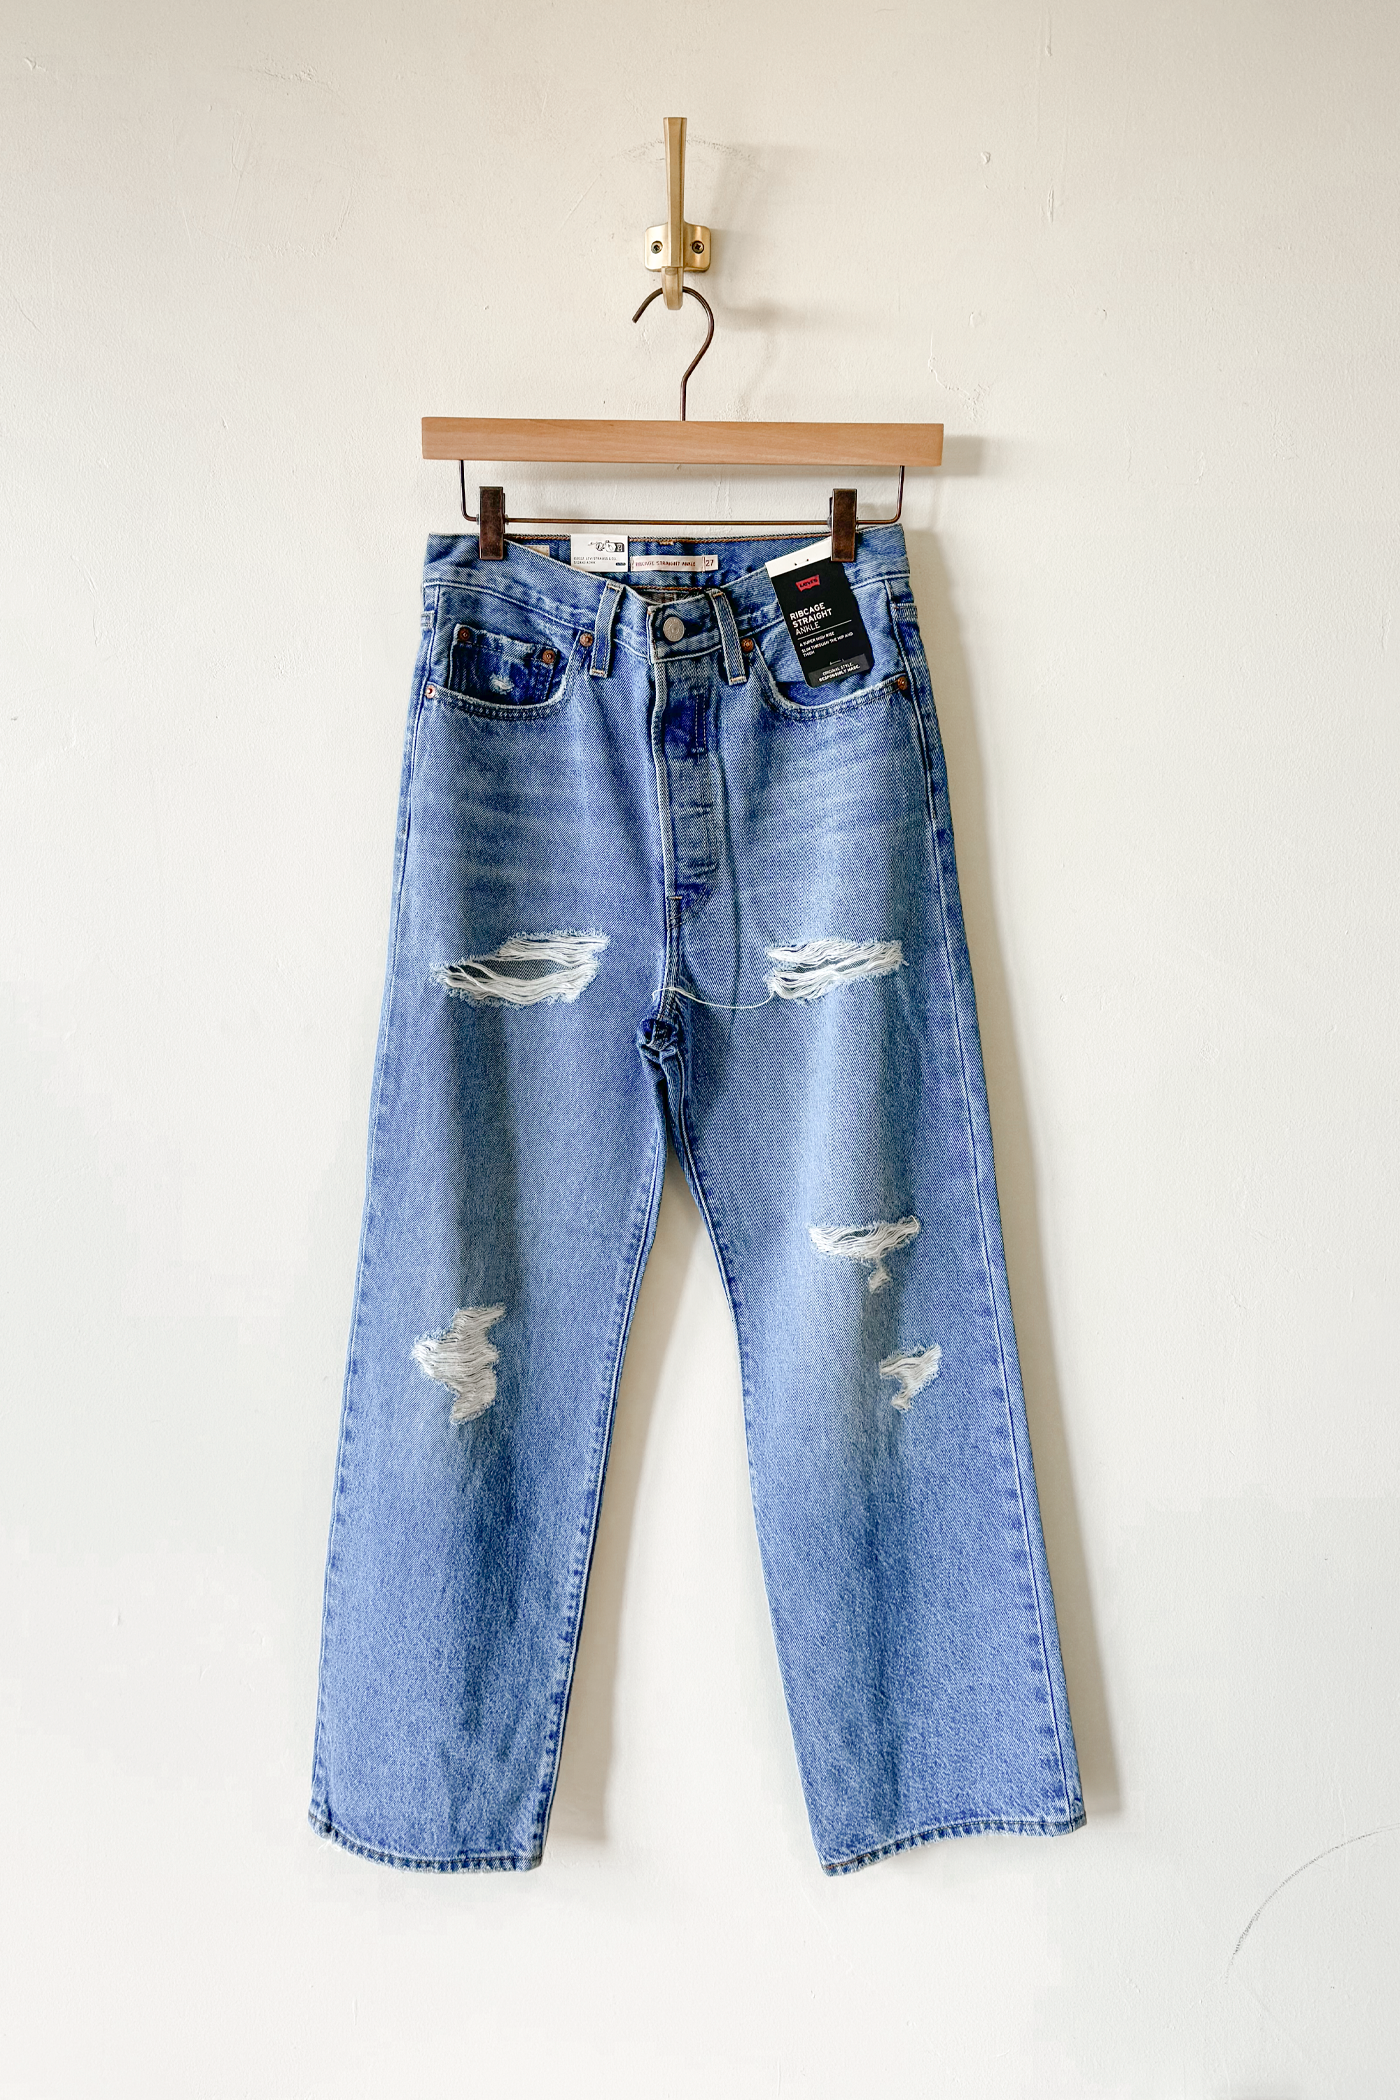 Live For The Music Ribcage Straight Jeans by Levi's